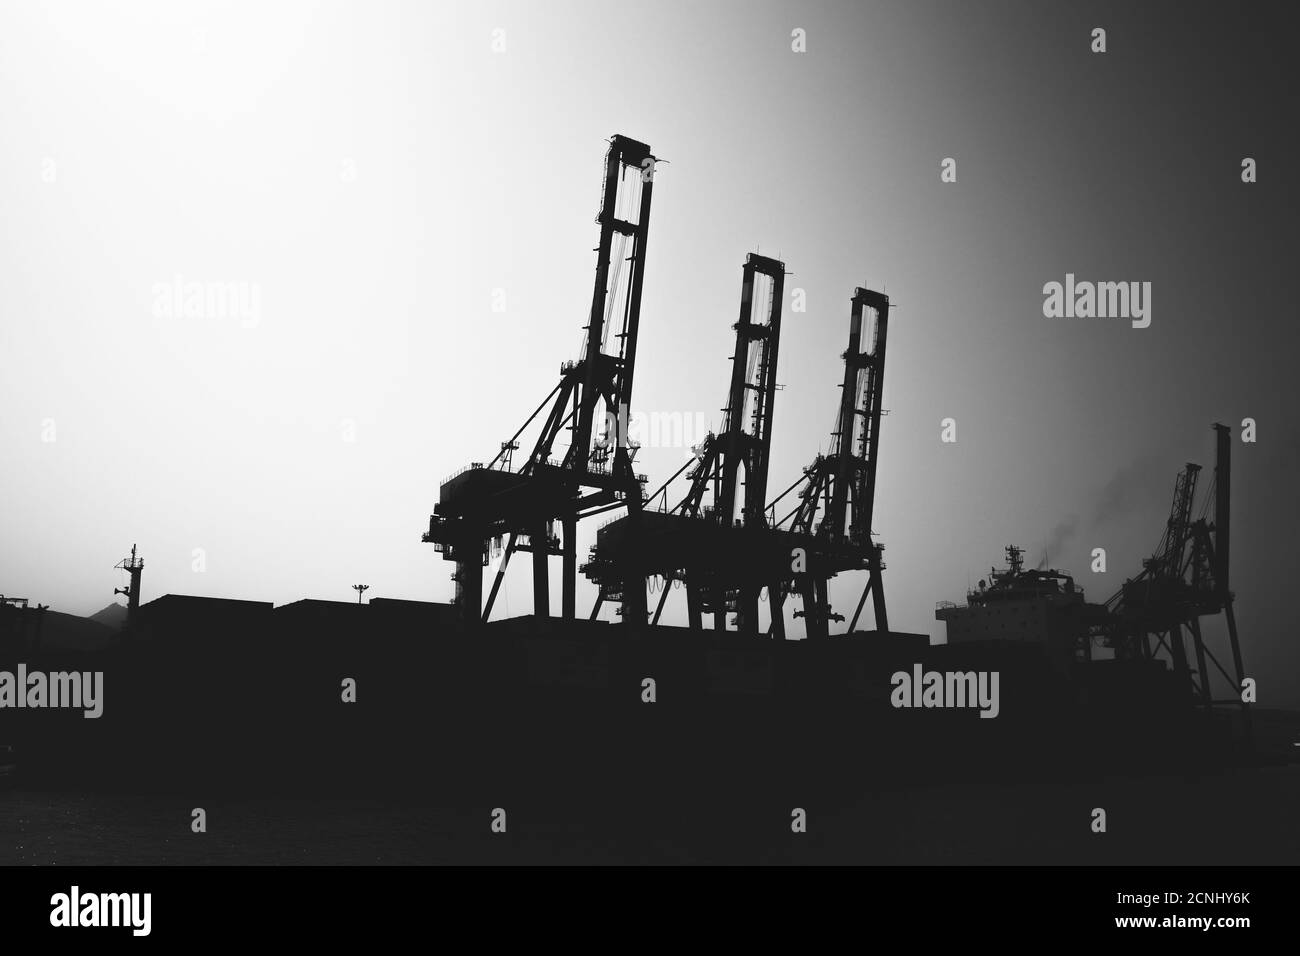 Gantry cranes silhouette photo, industrial cargo port view, black and white Stock Photo